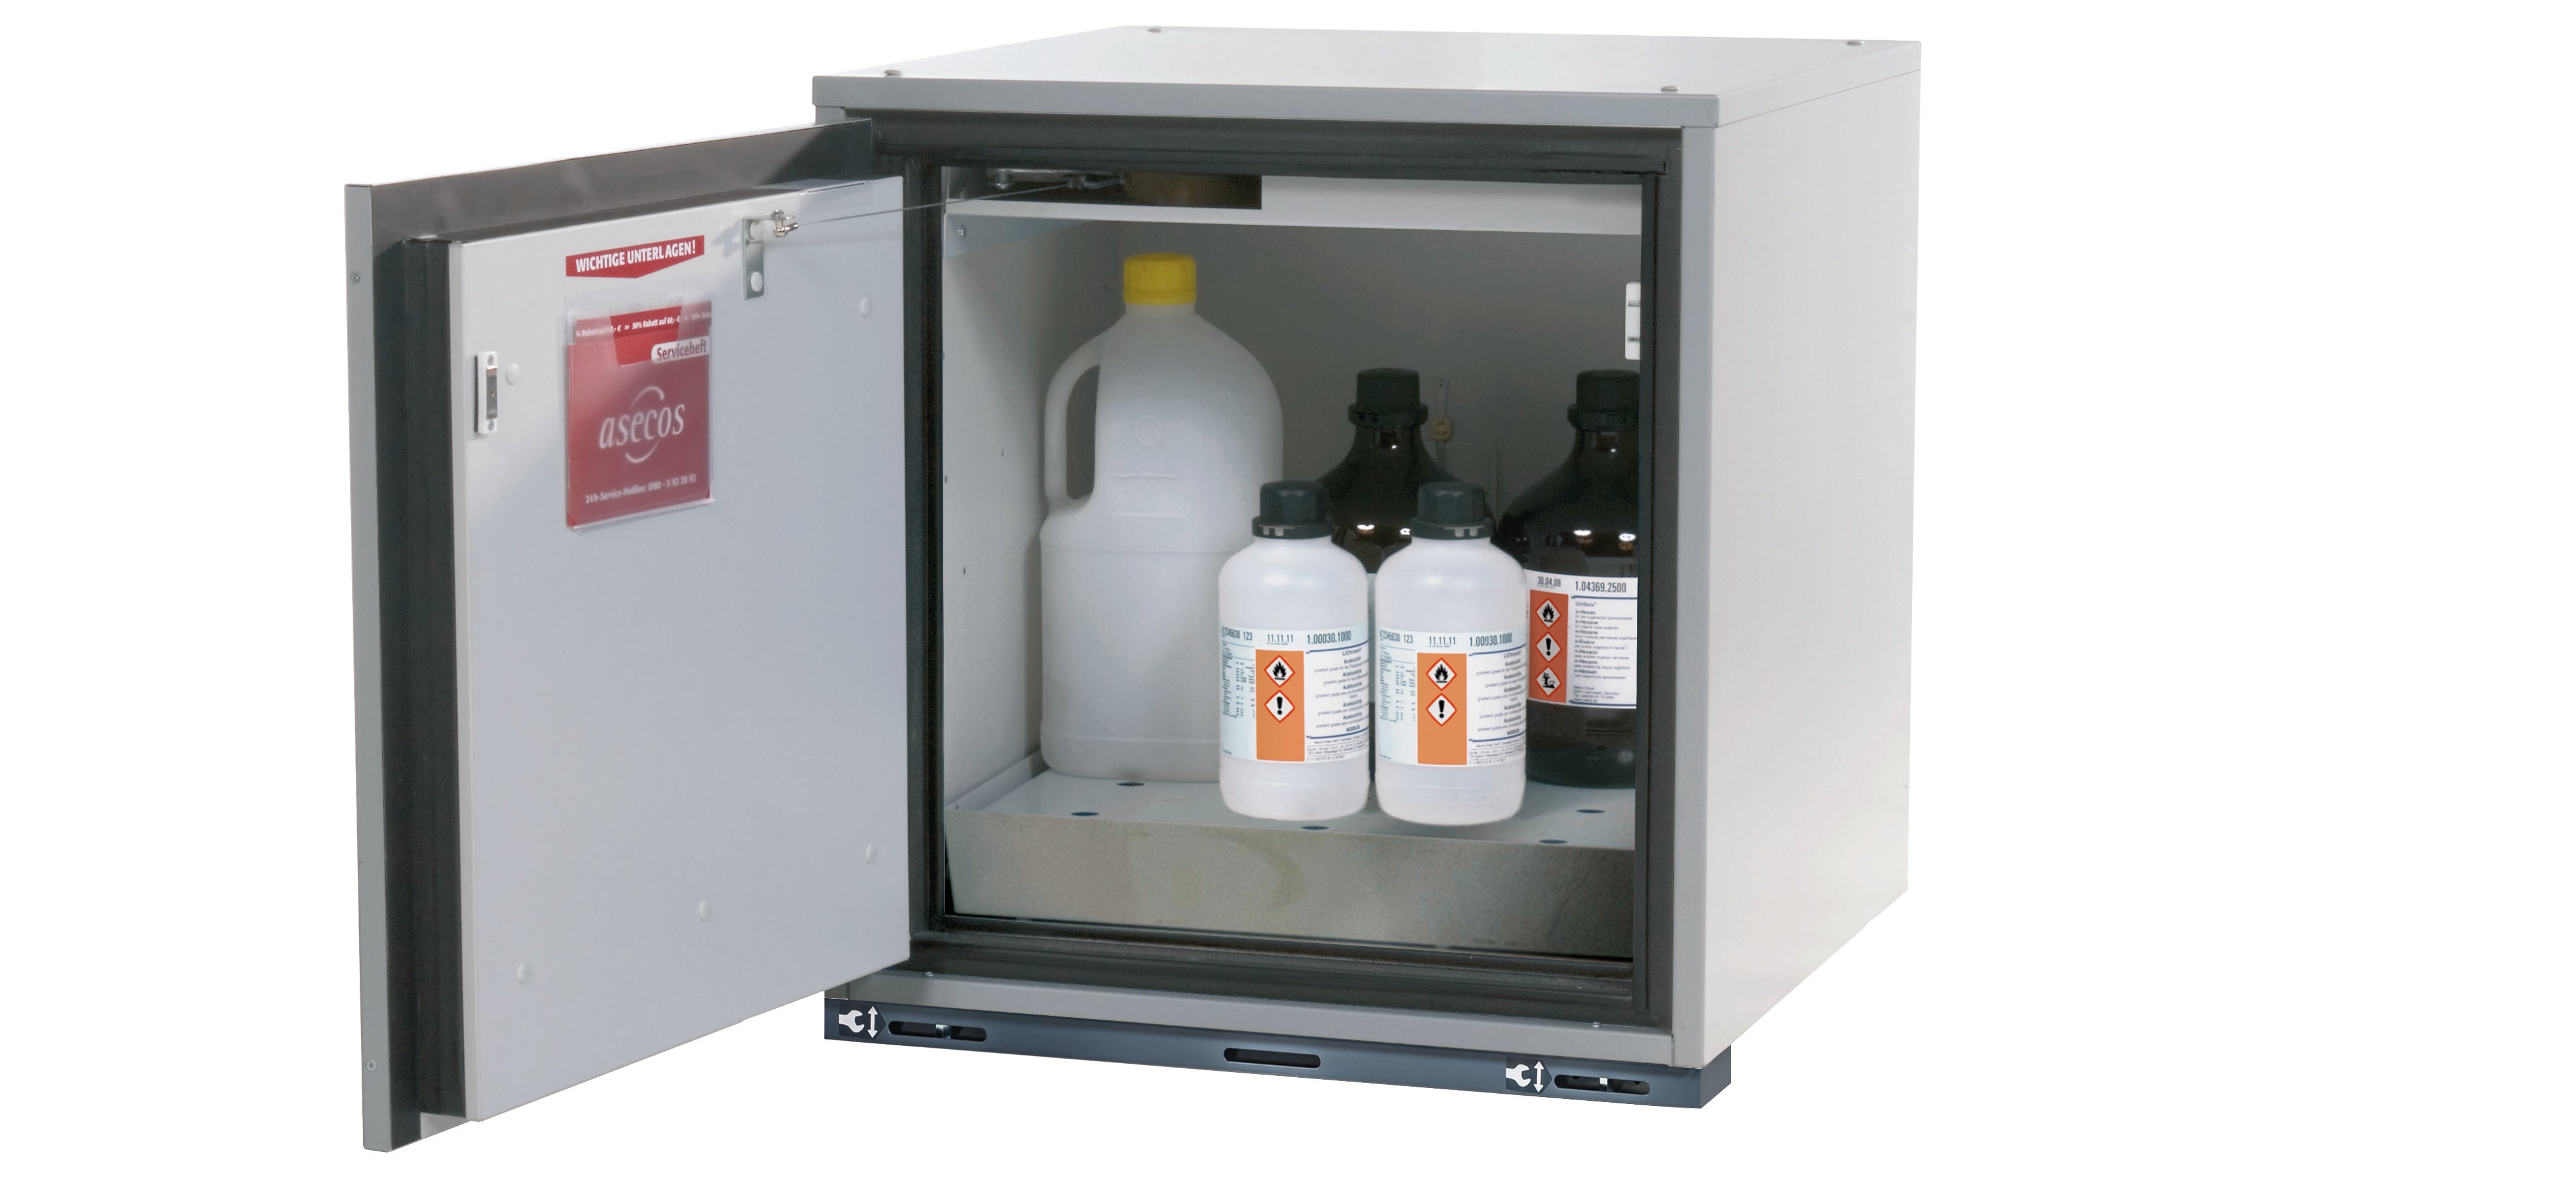 Type 90 safety base cabinet UB-T-90 model UB90.060.059.UL.T in light gray RAL 7035 with 1x perforated sheet insert standard (stainless steel 1.4016)